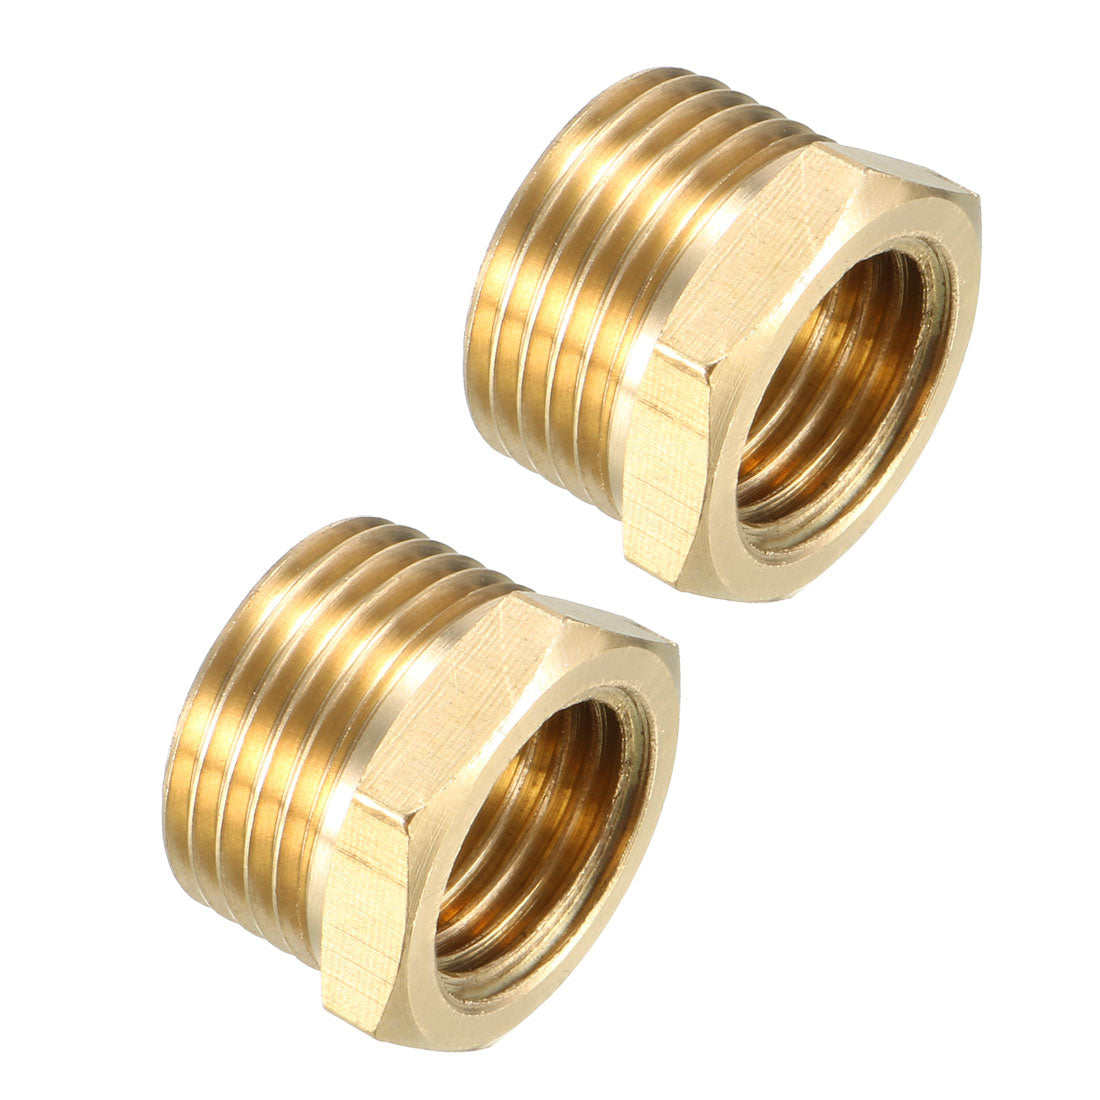 uxcell Uxcell Brass Threaded Pipe Fitting G3/8 Male x G1/4 Female Hex Bushing Adapter 2pcs